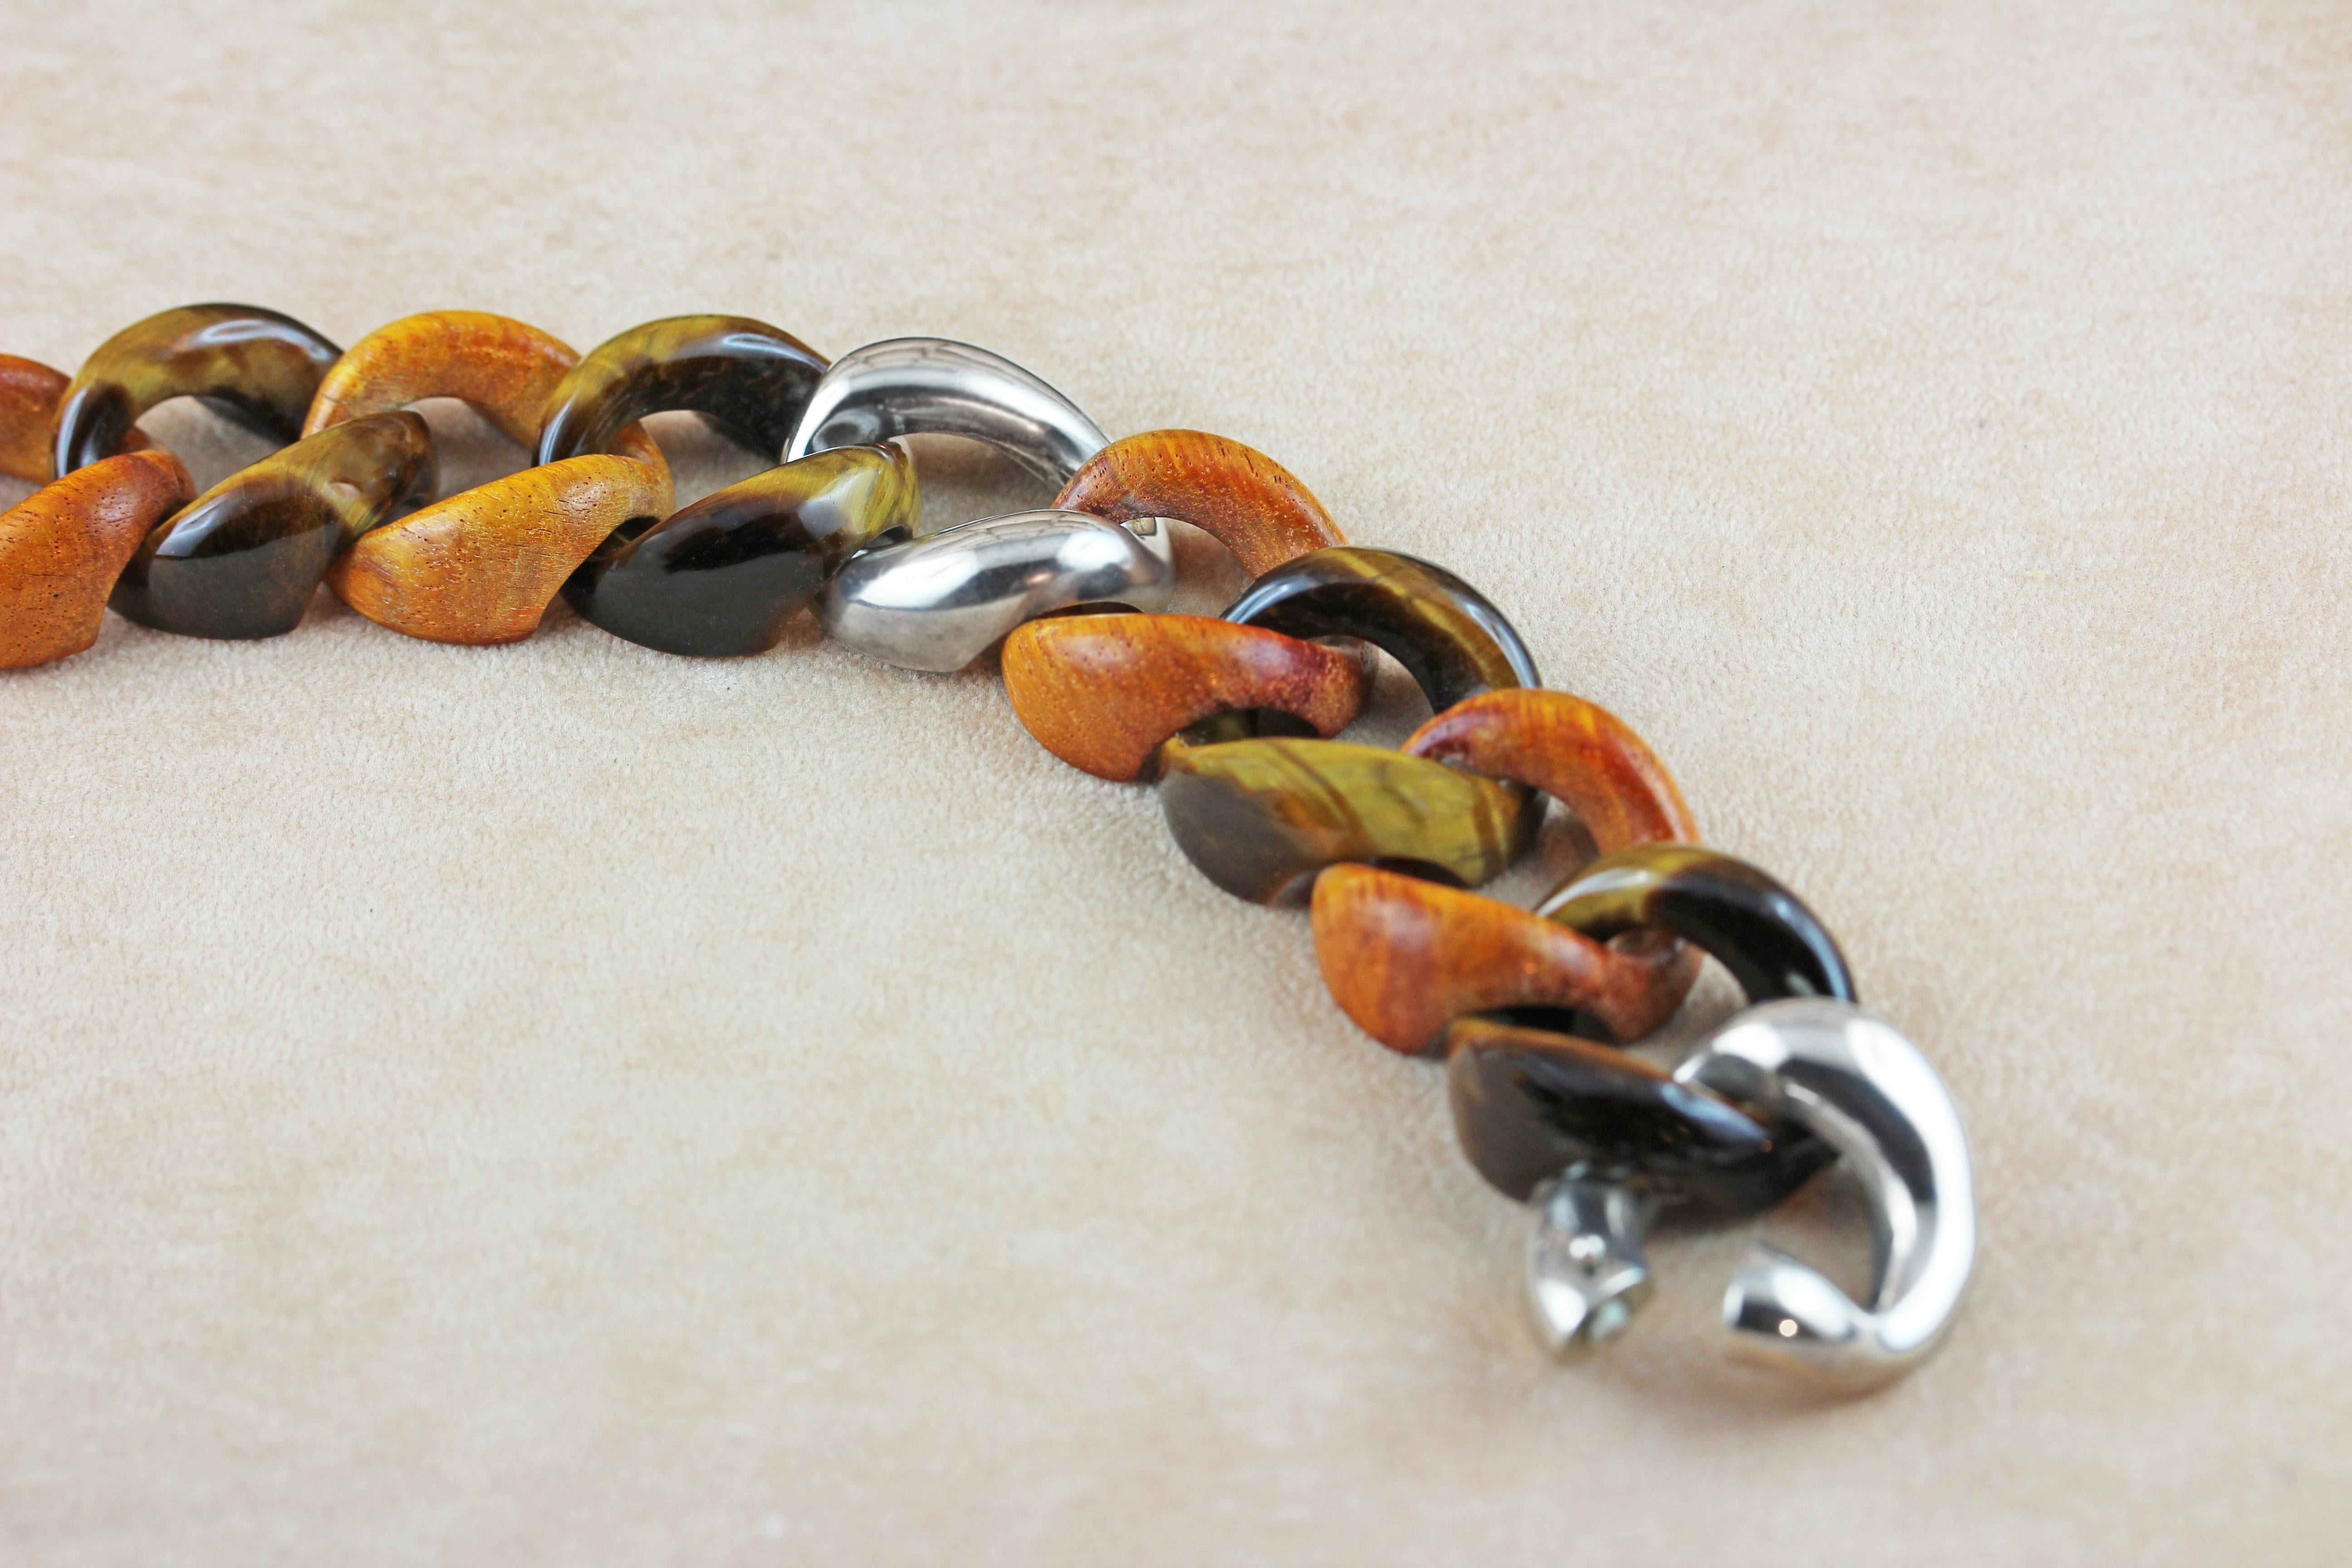 In this elegant groumette bracelet orange wooden rings are alternate with links made in tiger eye's creating a striking combinations of textures, finishes, and colors, mixing sophistication and a contemporary allure.
The clasp and one link in the